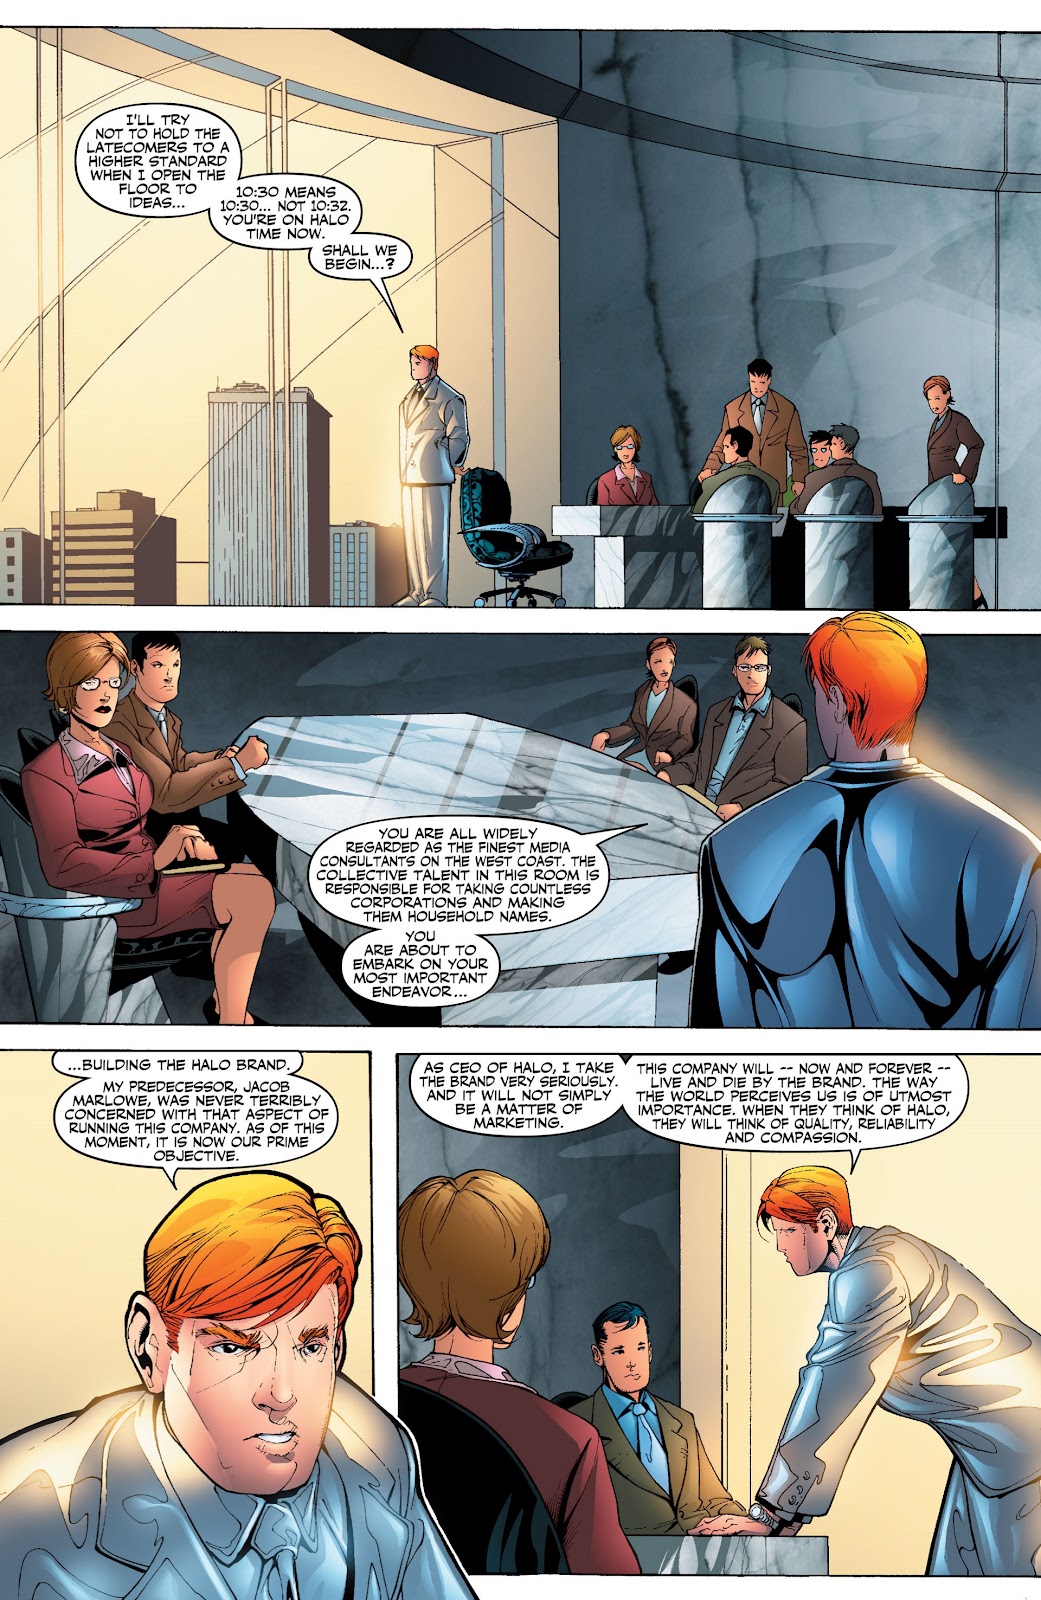 Wildcats Version 3.0 Issue #1 #1 - English 9